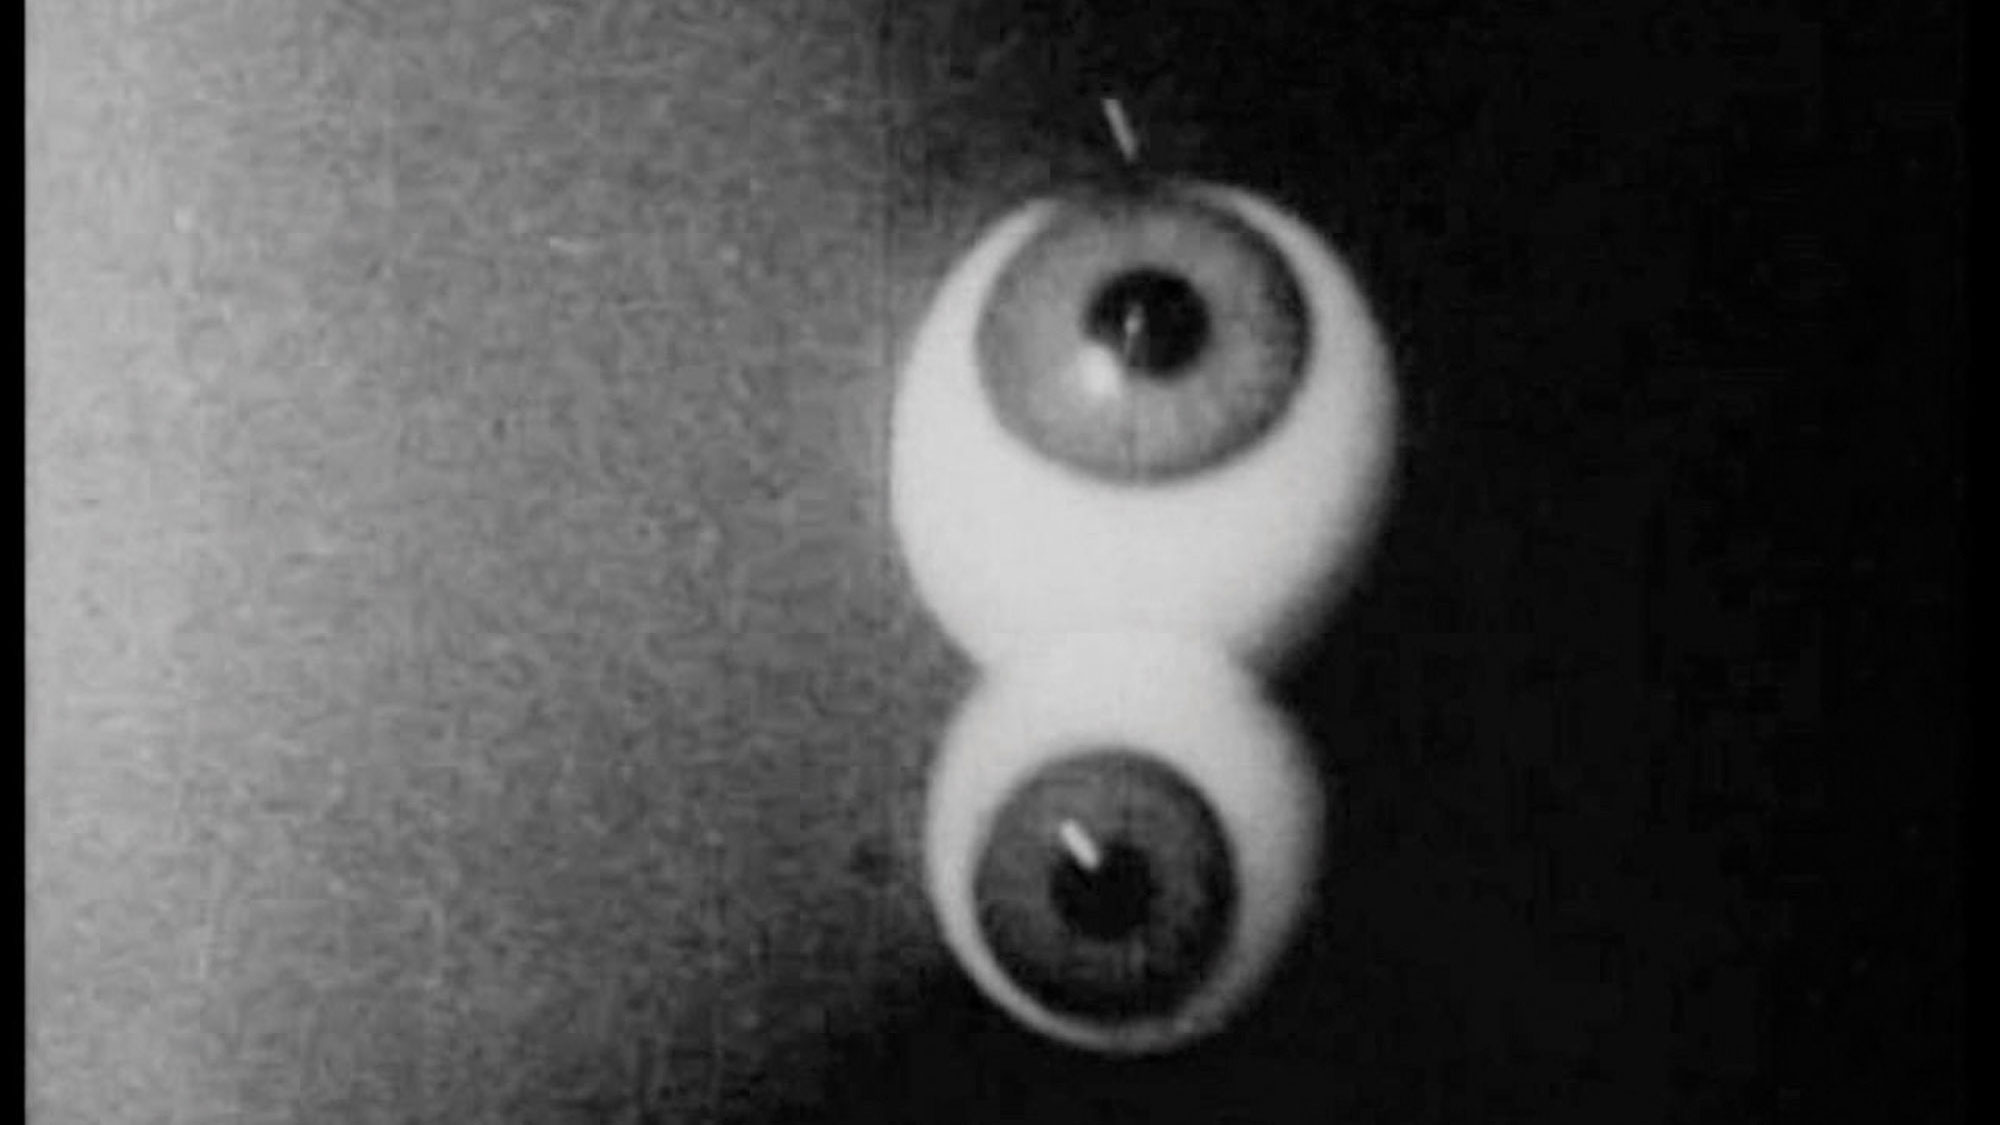 Black and white still of two horizontal eyeballs, with the top larger than the bottom. 